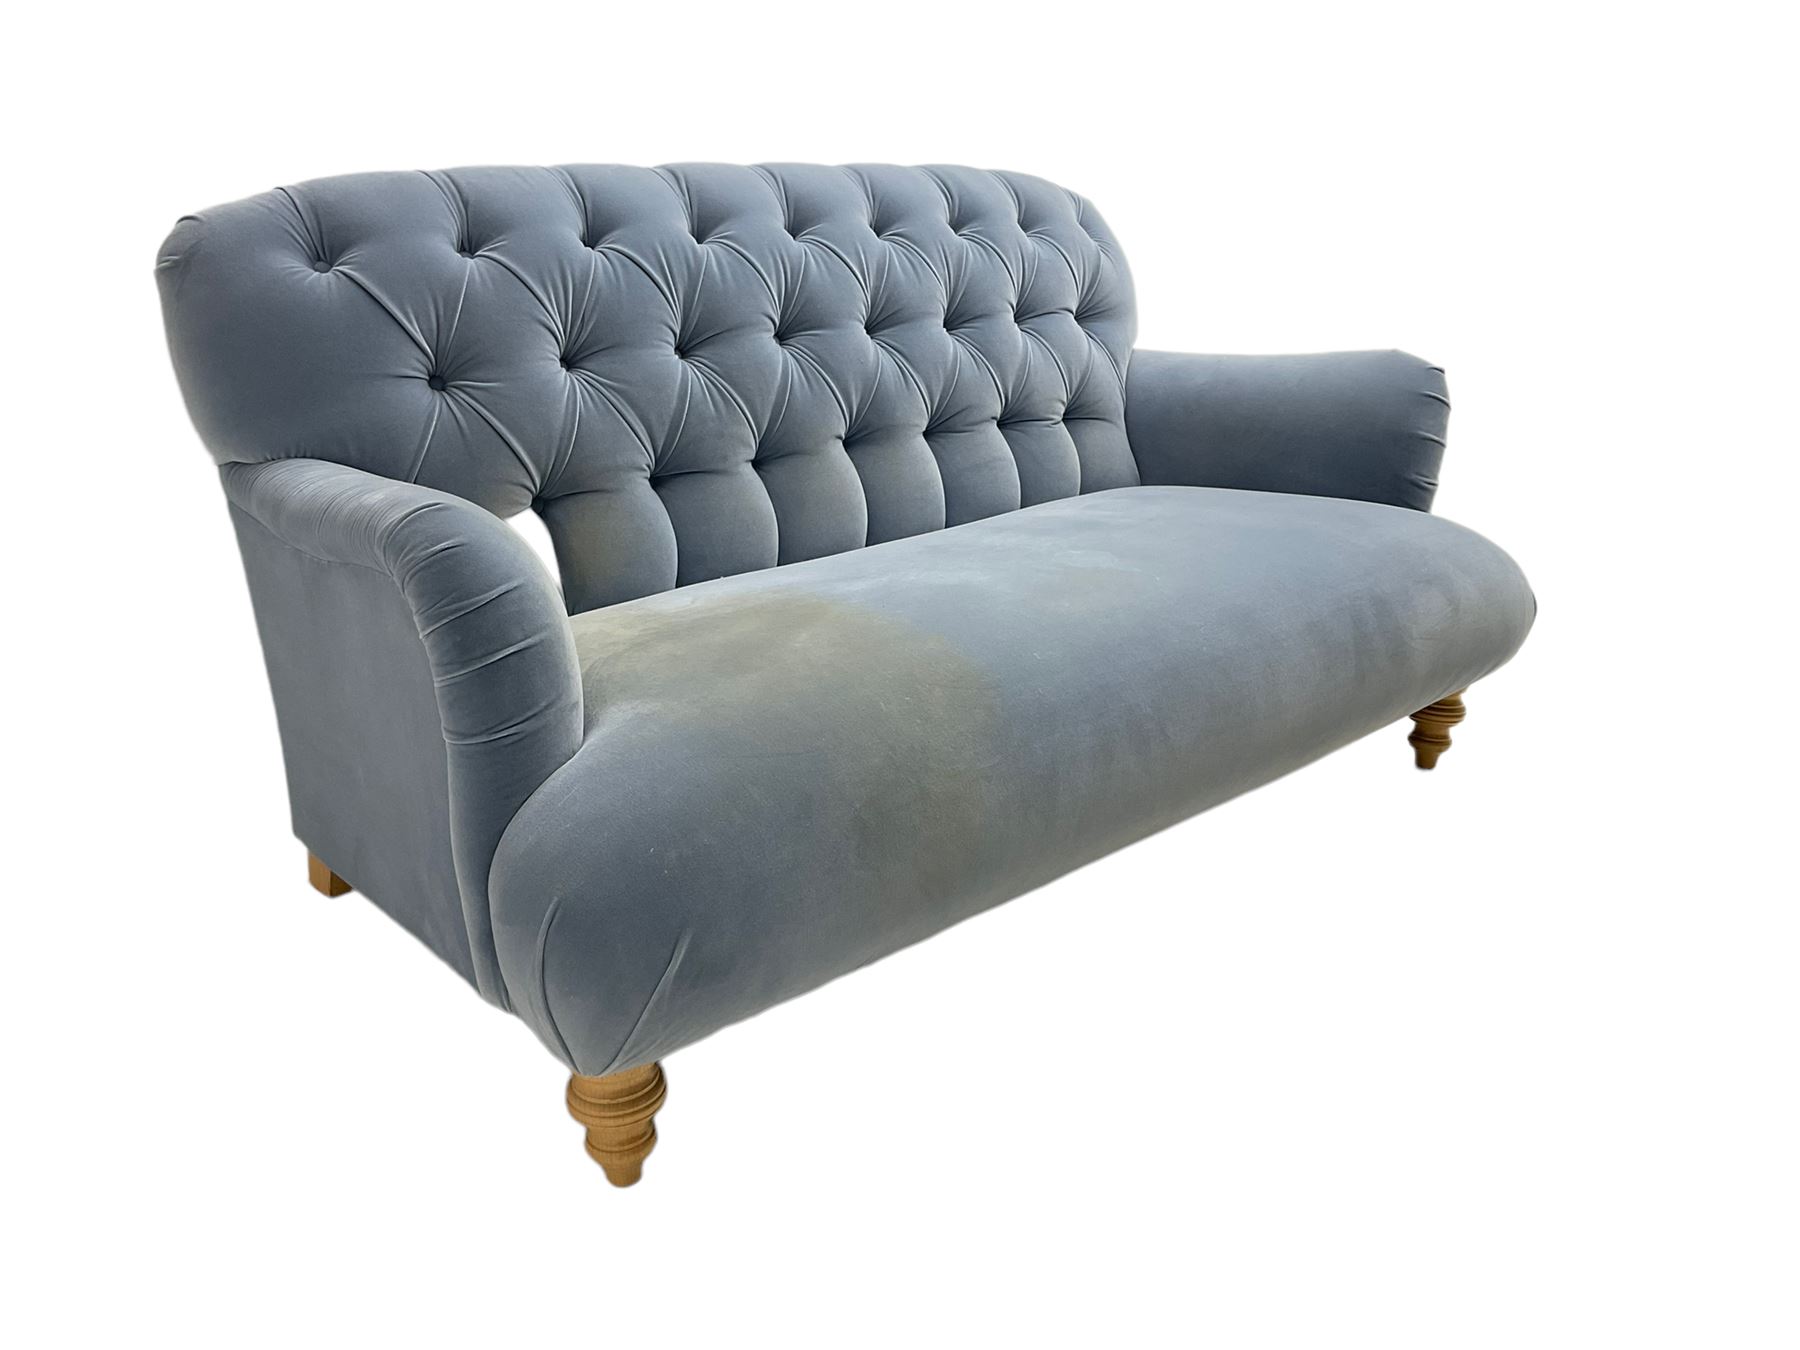 Tetrad - two seat sofa upholstered in baby blue buttoned fabric - Image 4 of 6